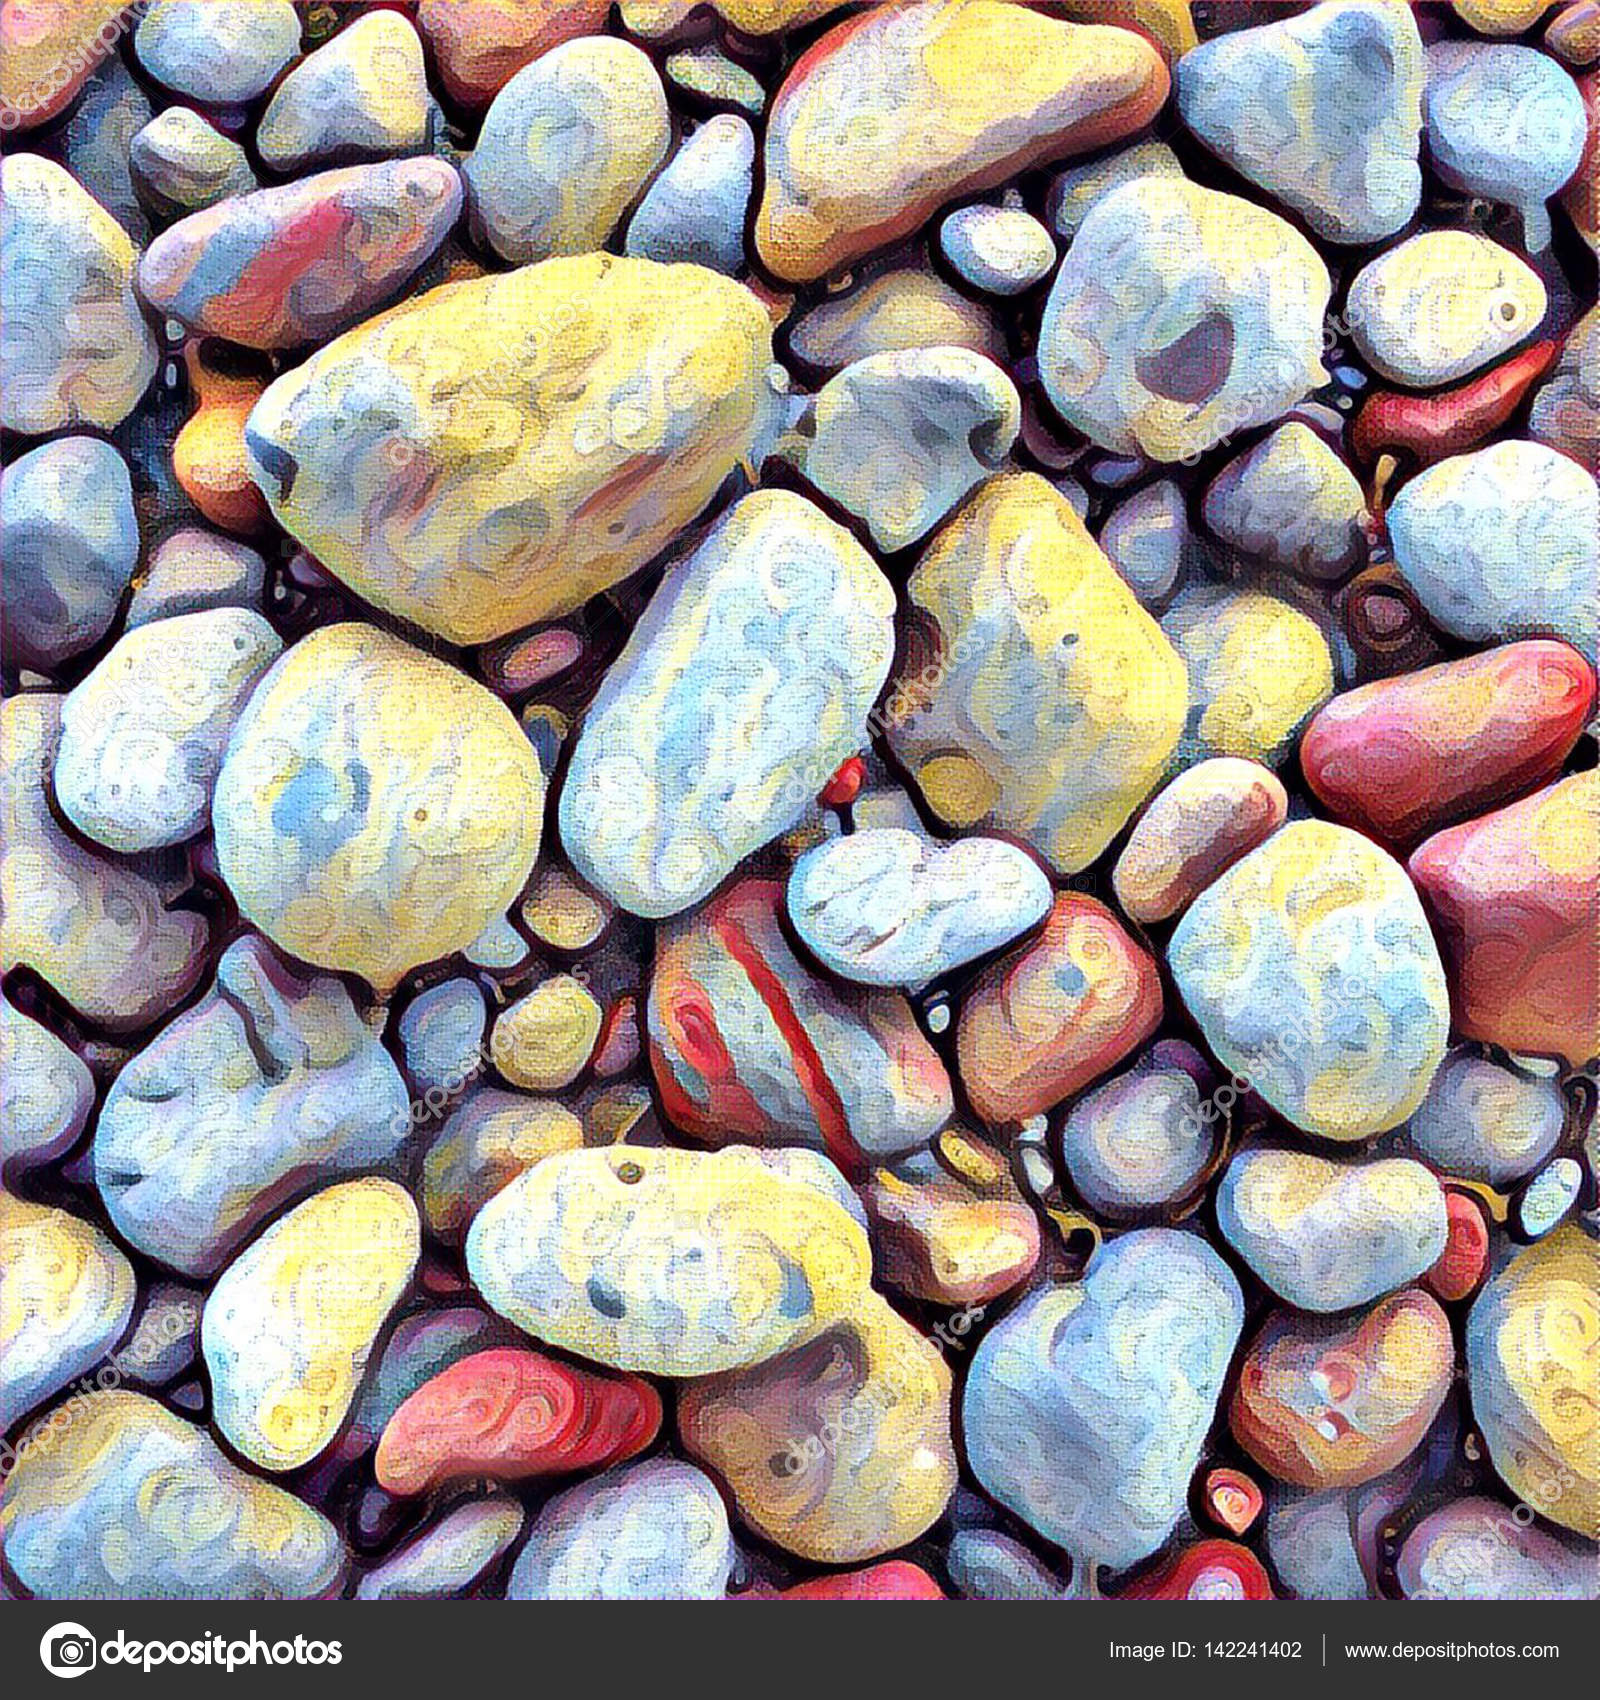 Stone background with round colorful pebbles from the sea beach ...